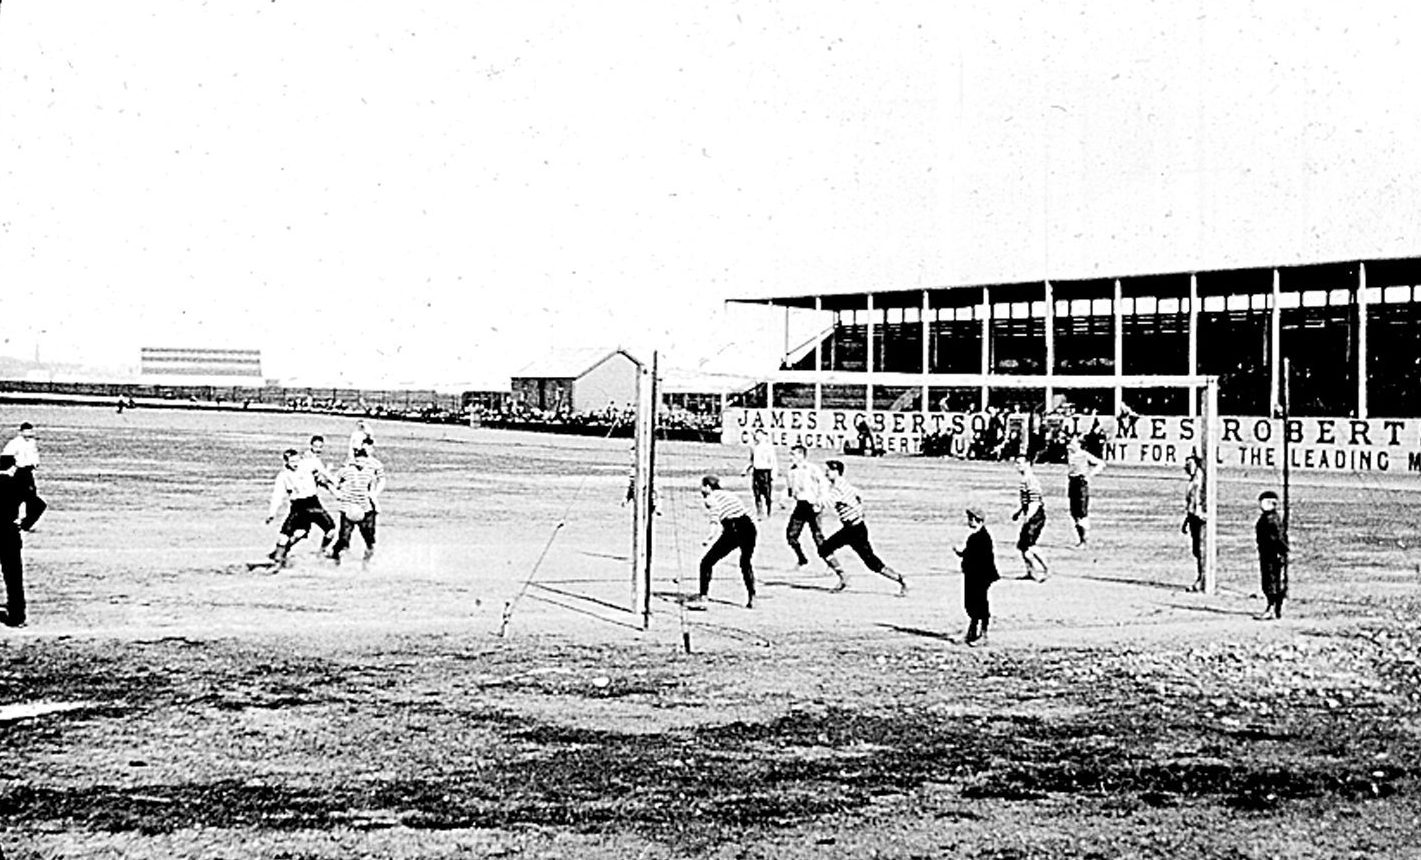 A game being played at Carolina Port in 1893. Image: Norrie Price.